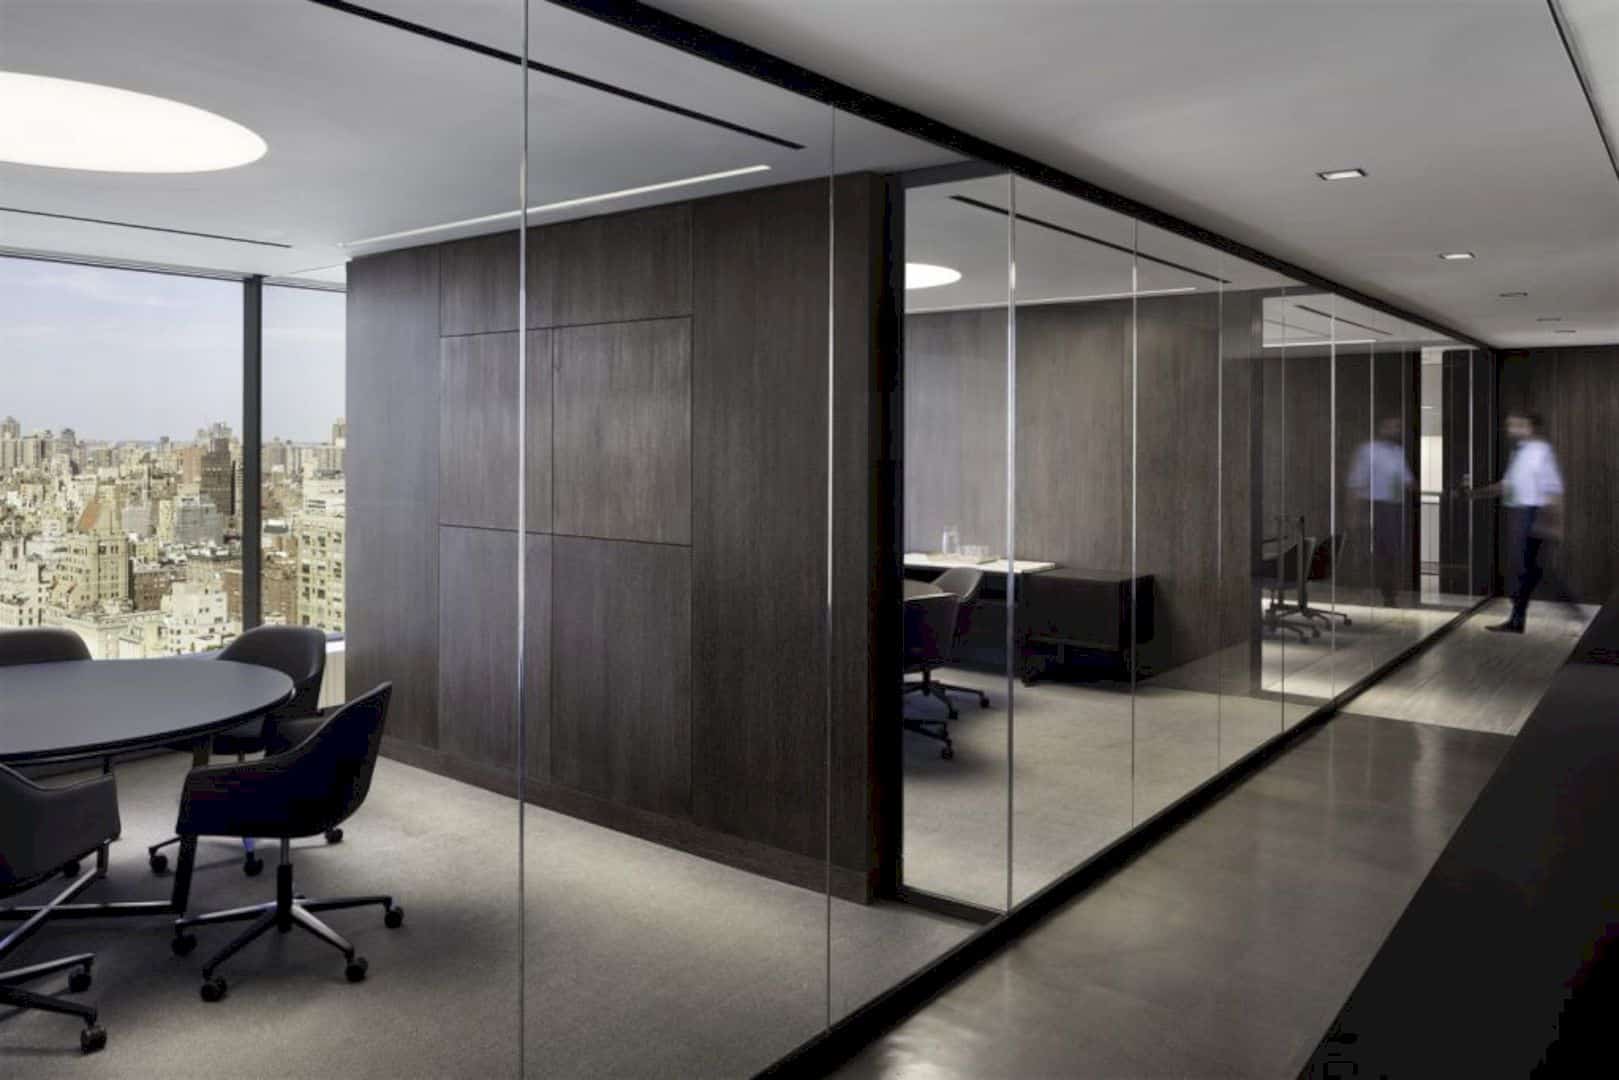 Central Park Office The Office Renovation Project To Increase Natural Light Exposure And Park Views 5